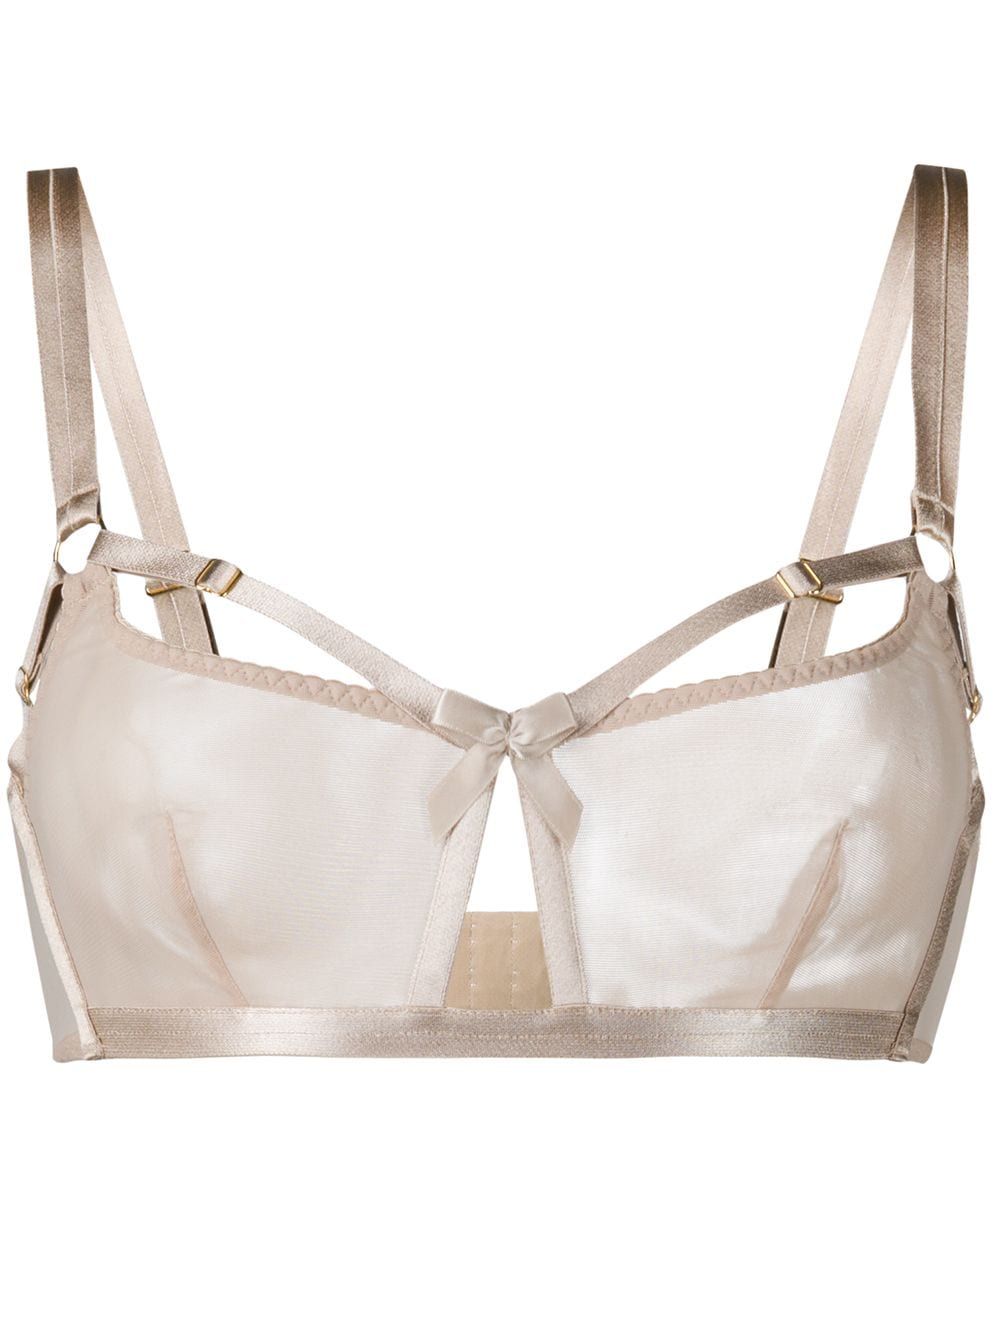 Bridal Bra: Finding the Perfect Support for Your Special Day